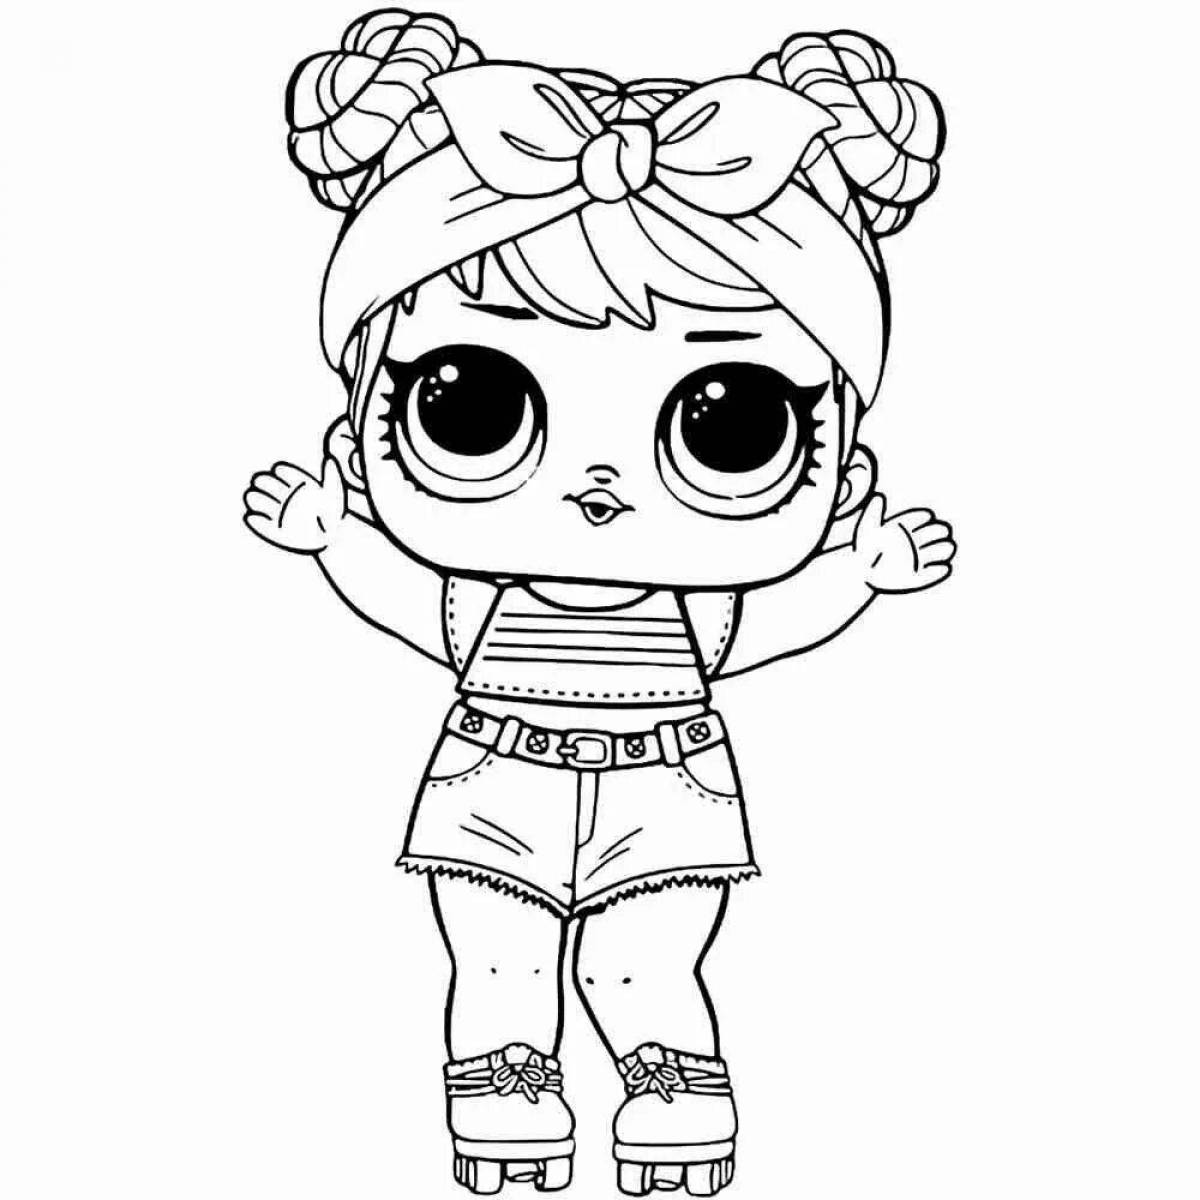 Charon baby bubbly coloring page